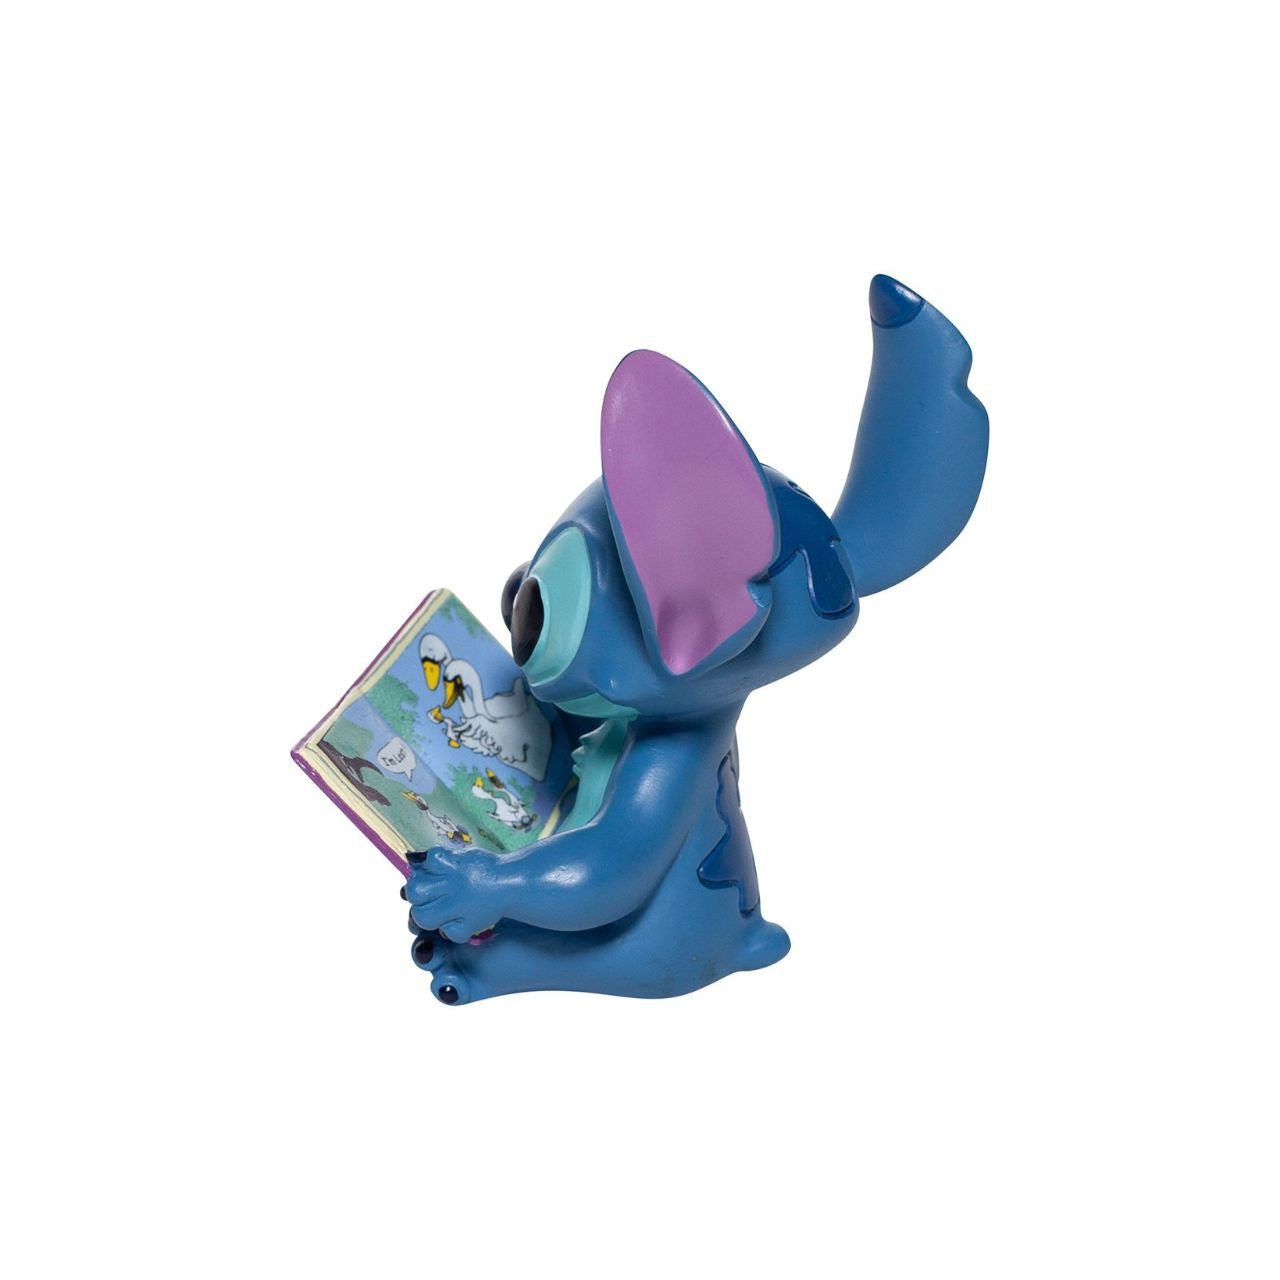 Disney Showcase Stitch Book Figurine  Even adorable Stitch loves a good read. Yes he is cute, charismatic and clever. Ohana means family , making this delightful Stitch a much welcomes addition to the collection of six minis . Hand-painted and hand crafted, Stitch is supplied in a windowed branded gift box.